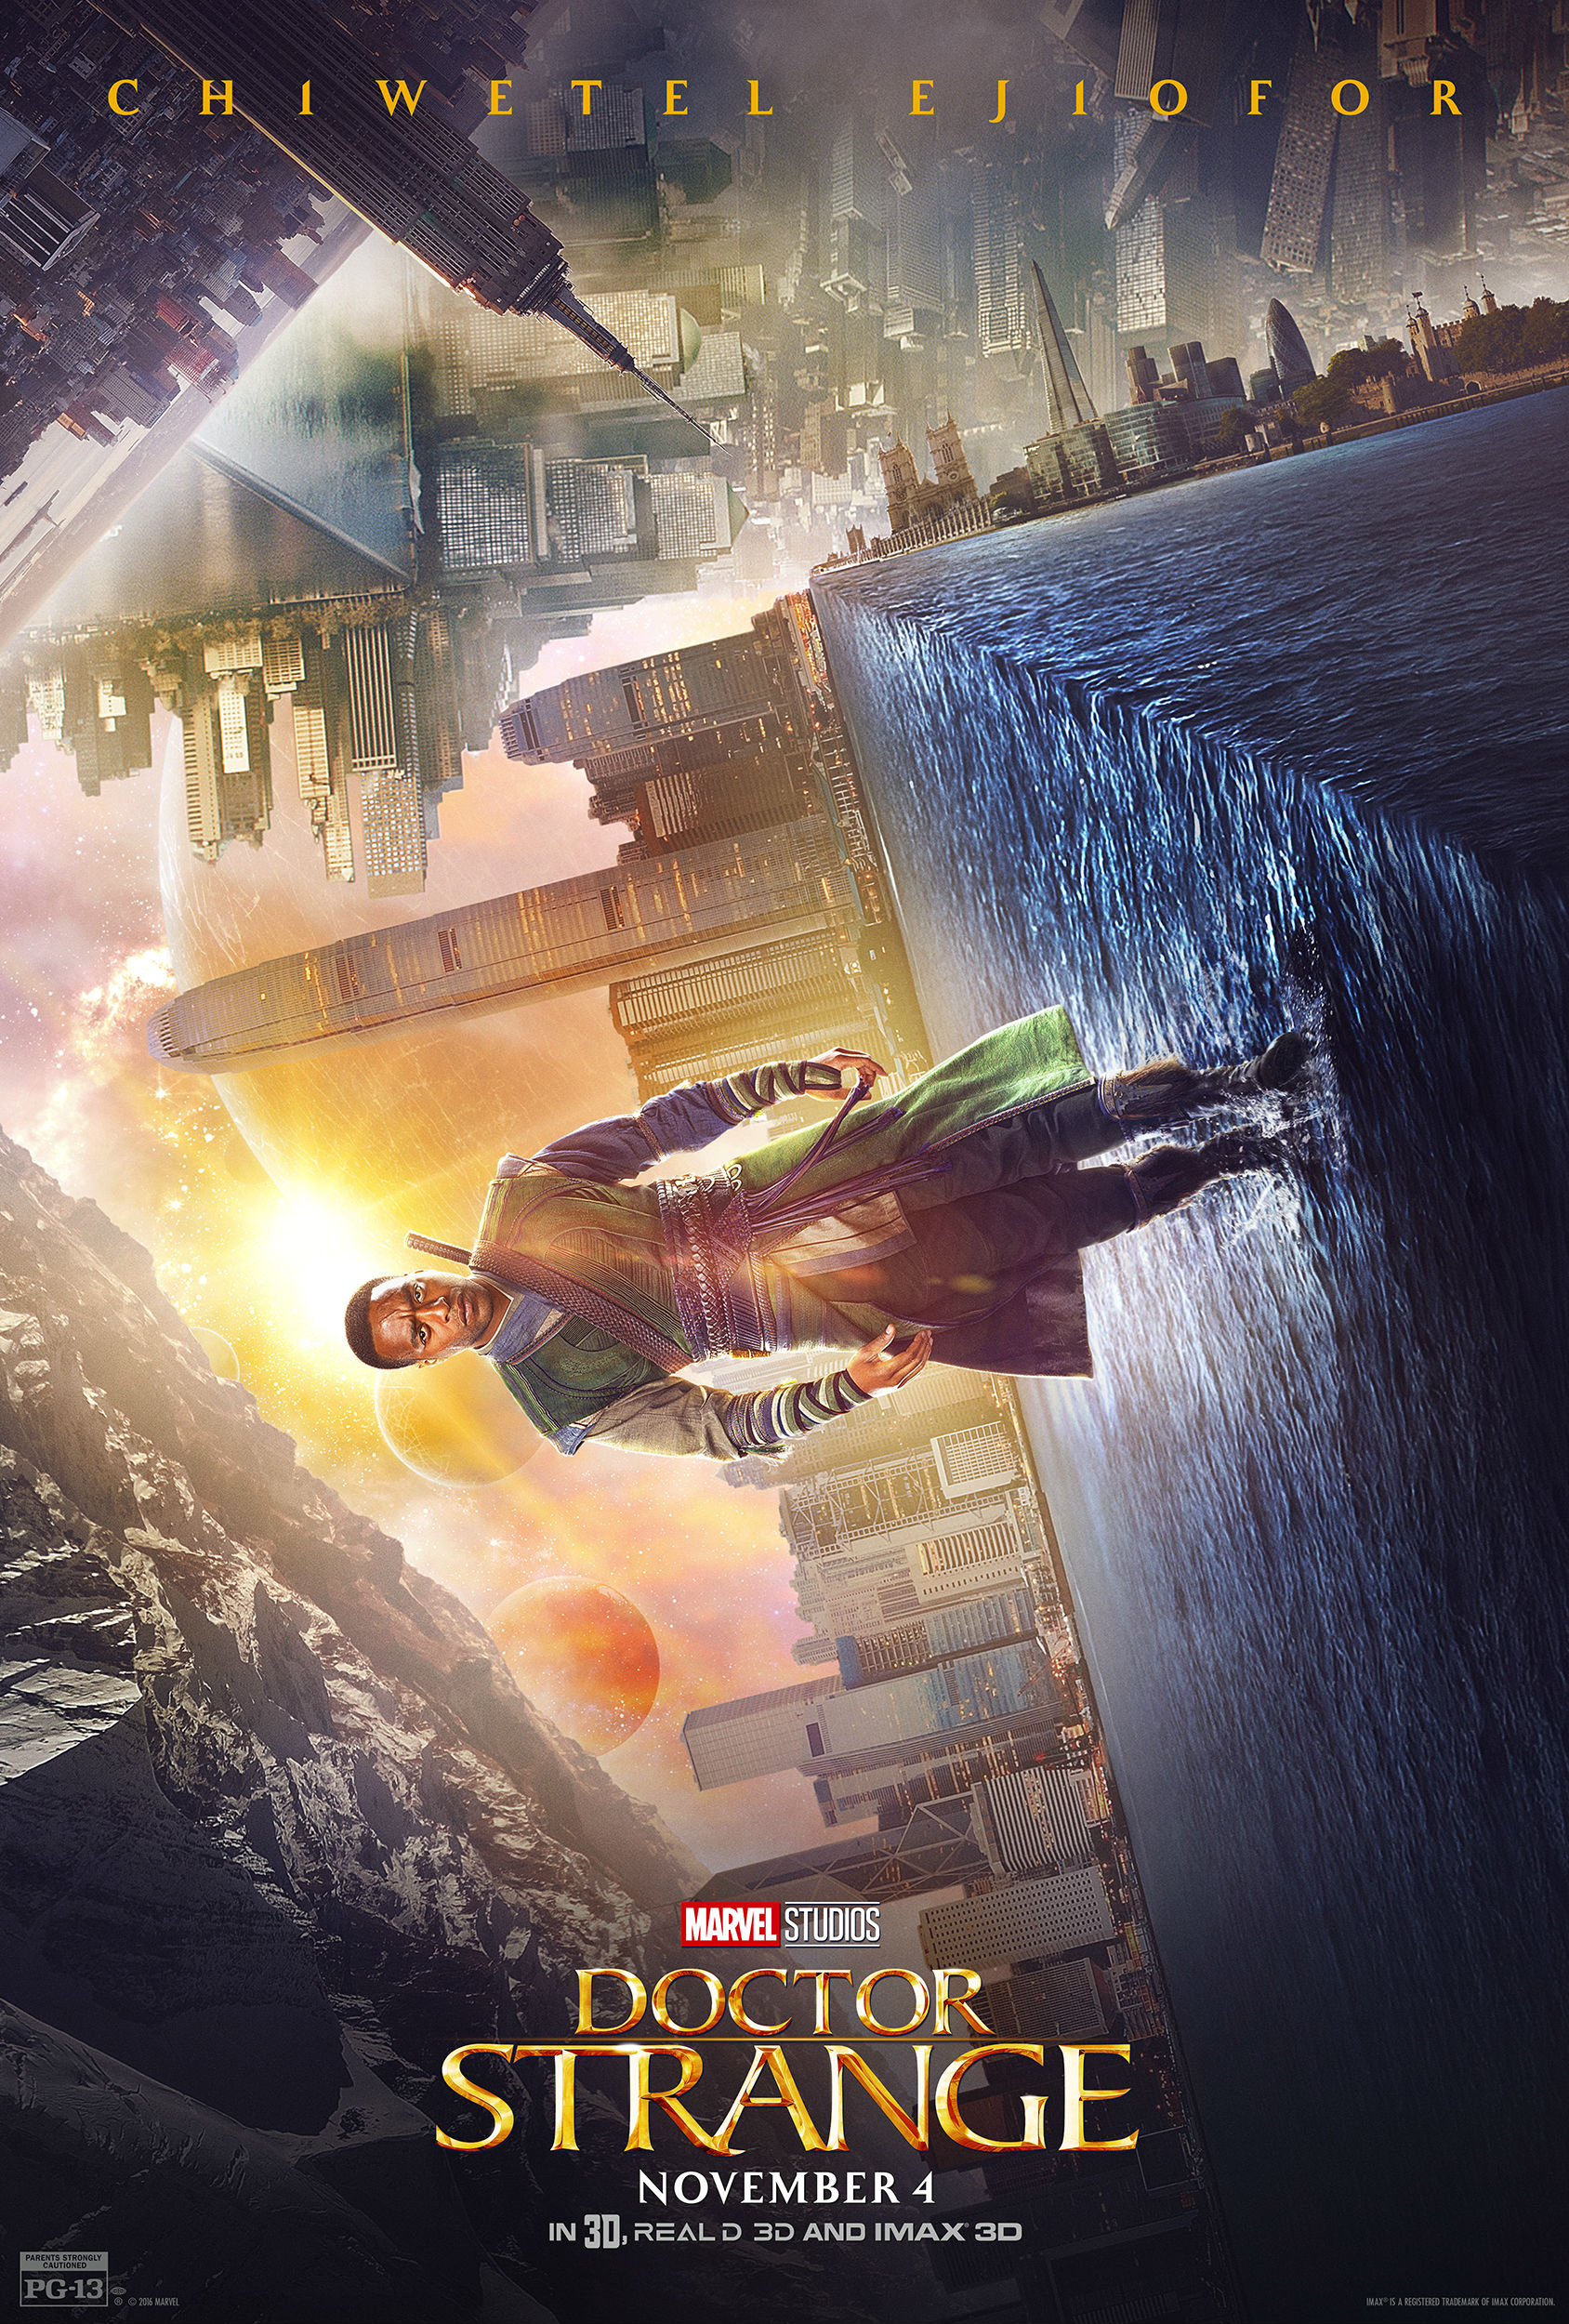 These Six New Doctor Strange Posters Will Have You Head Over Heels (Or Vice Versa)